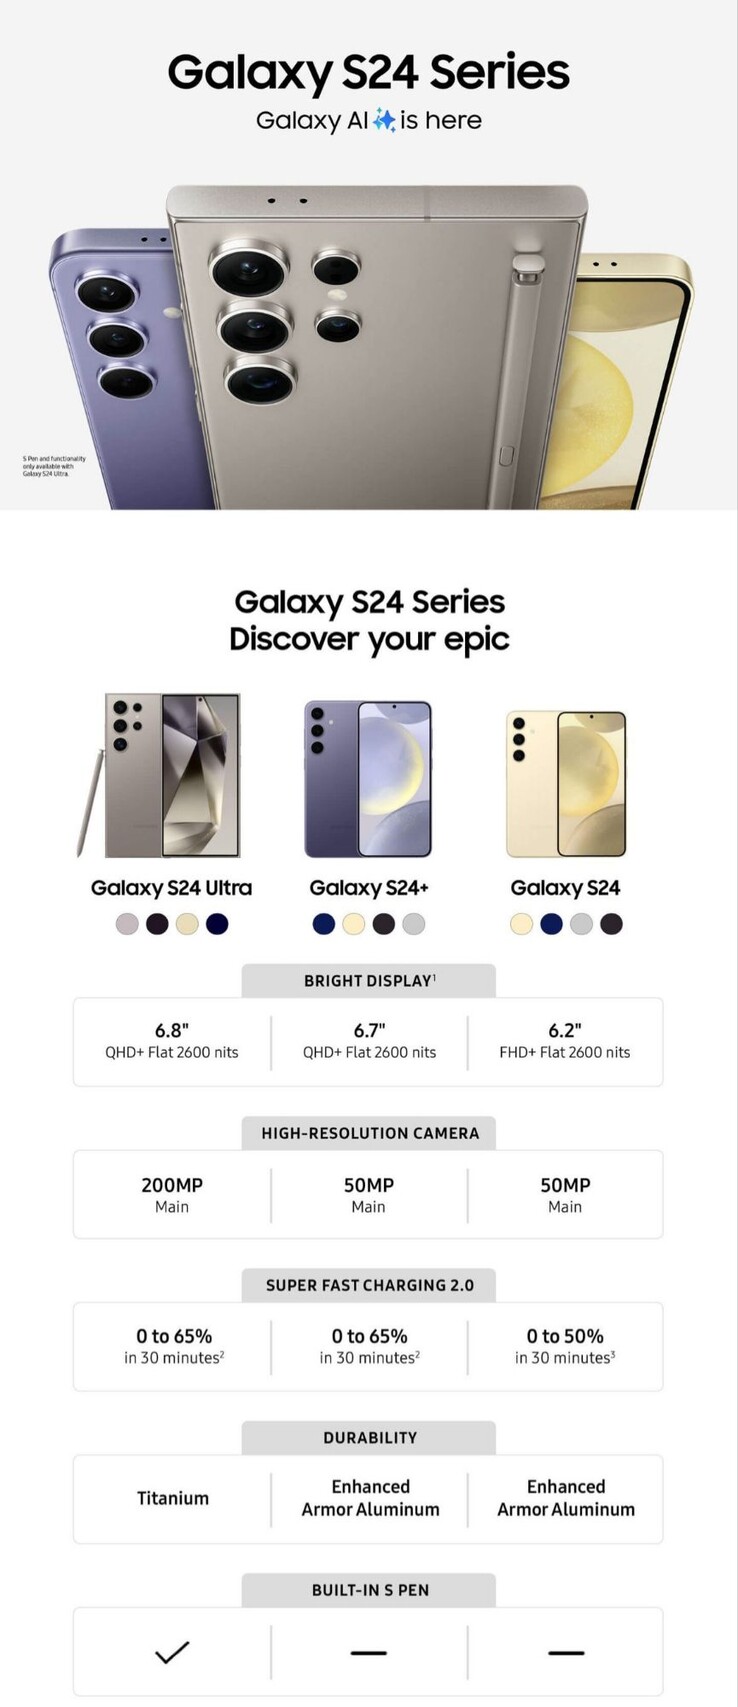 Samsung Galaxy S24, S24 Ultra promos highlight camera features. 7